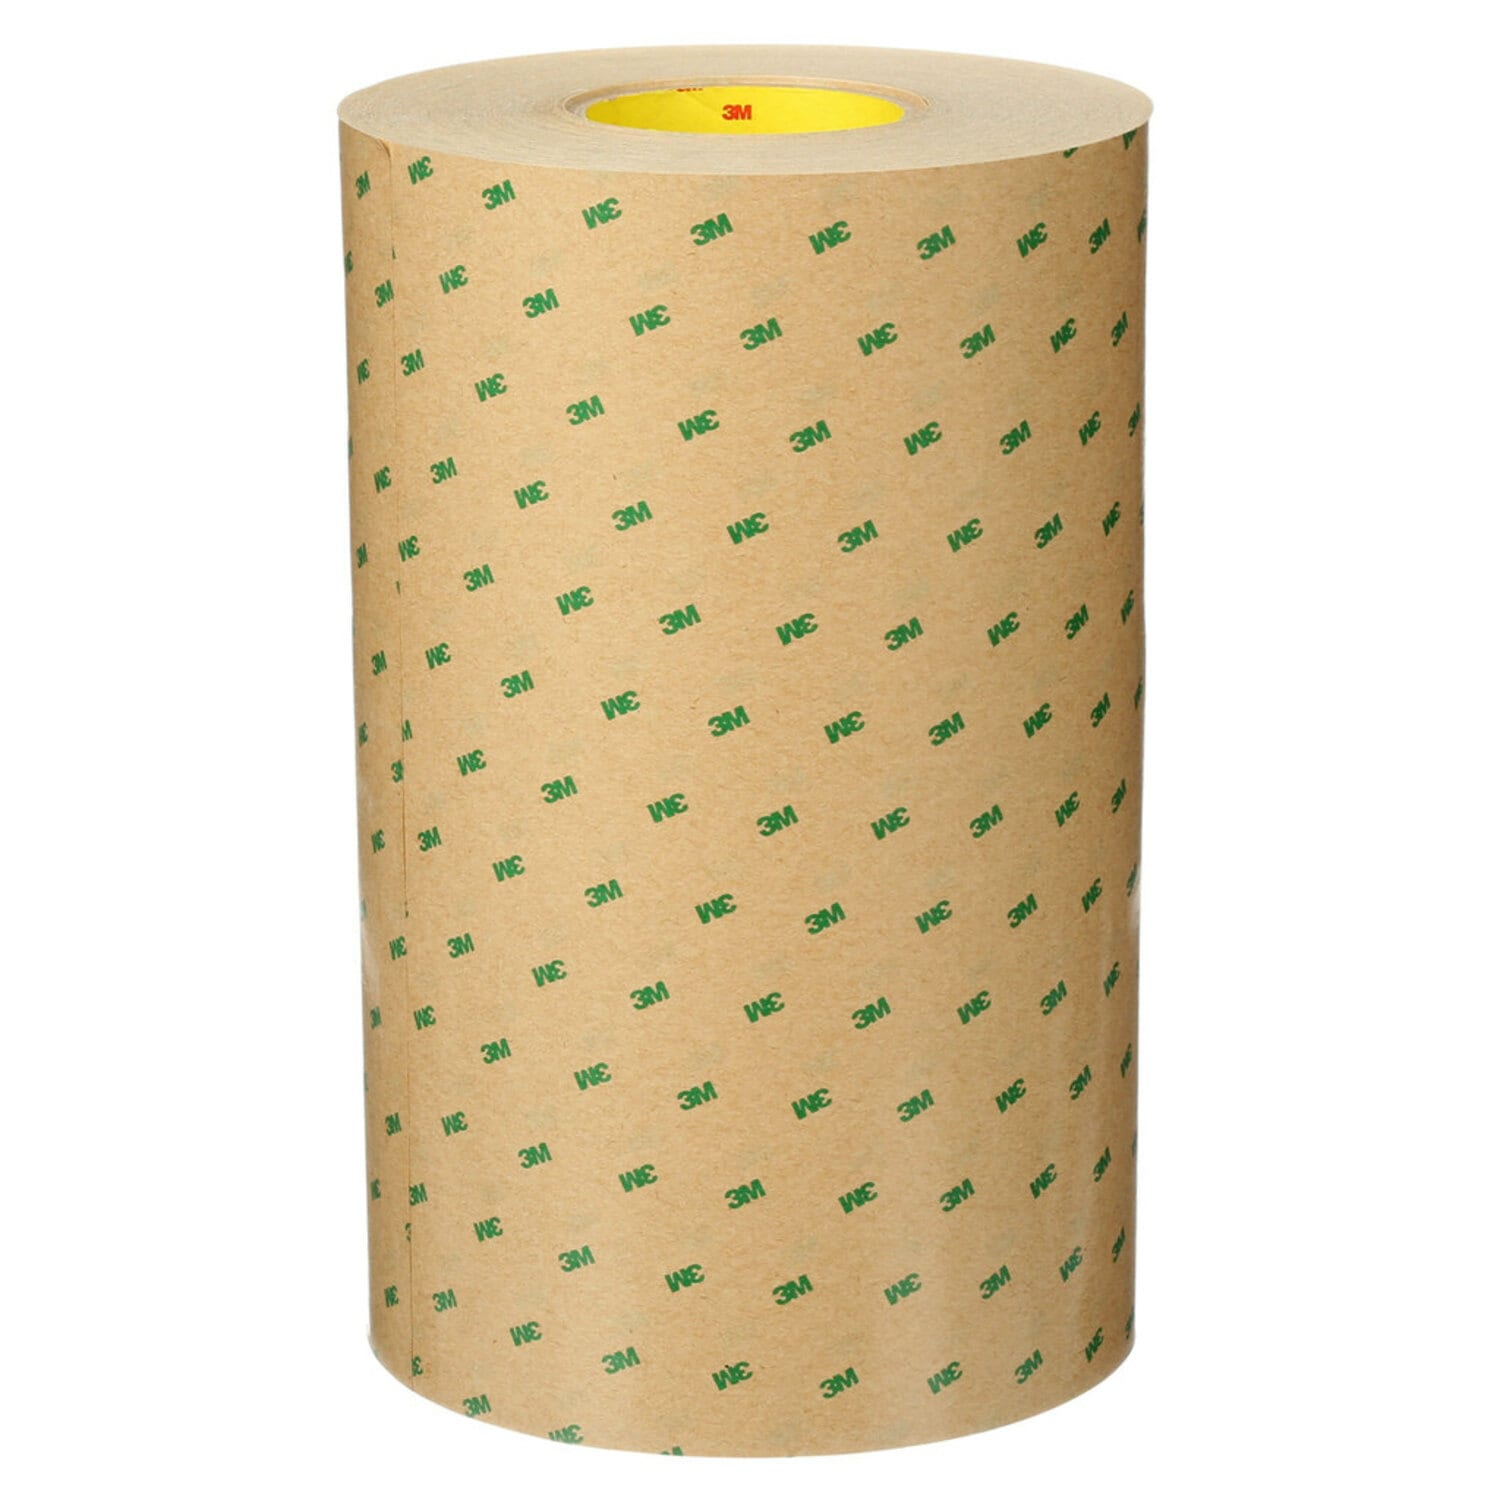 7010535860 - 3M Adhesive Transfer Tape 9471, Clear, 23 3/4 in x 180 yd, 2 mil, Roll